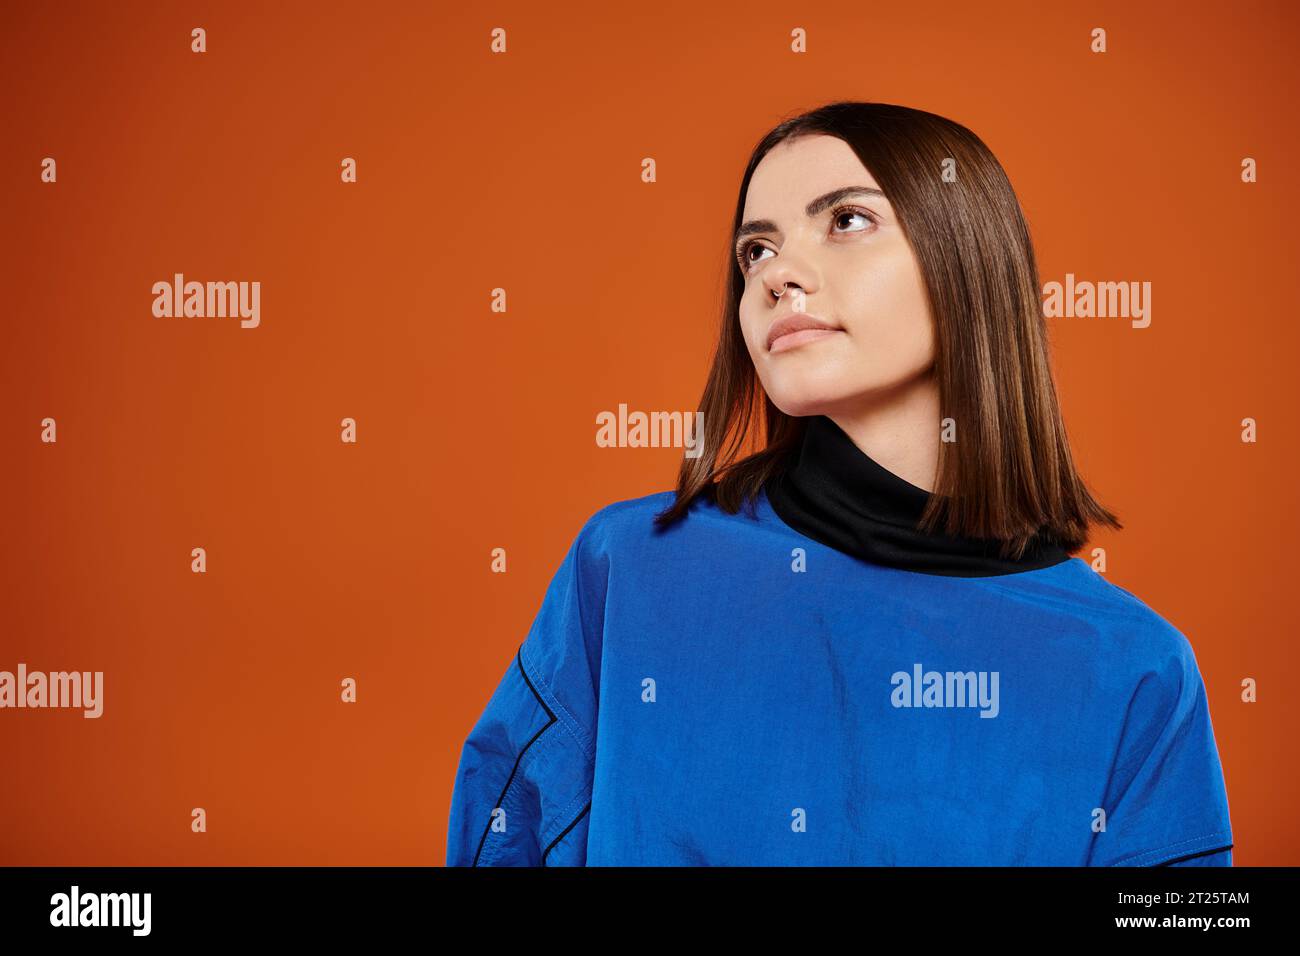 pensive woman with pierced nose looking away while standing in blue jacket on orange background Stock Photo